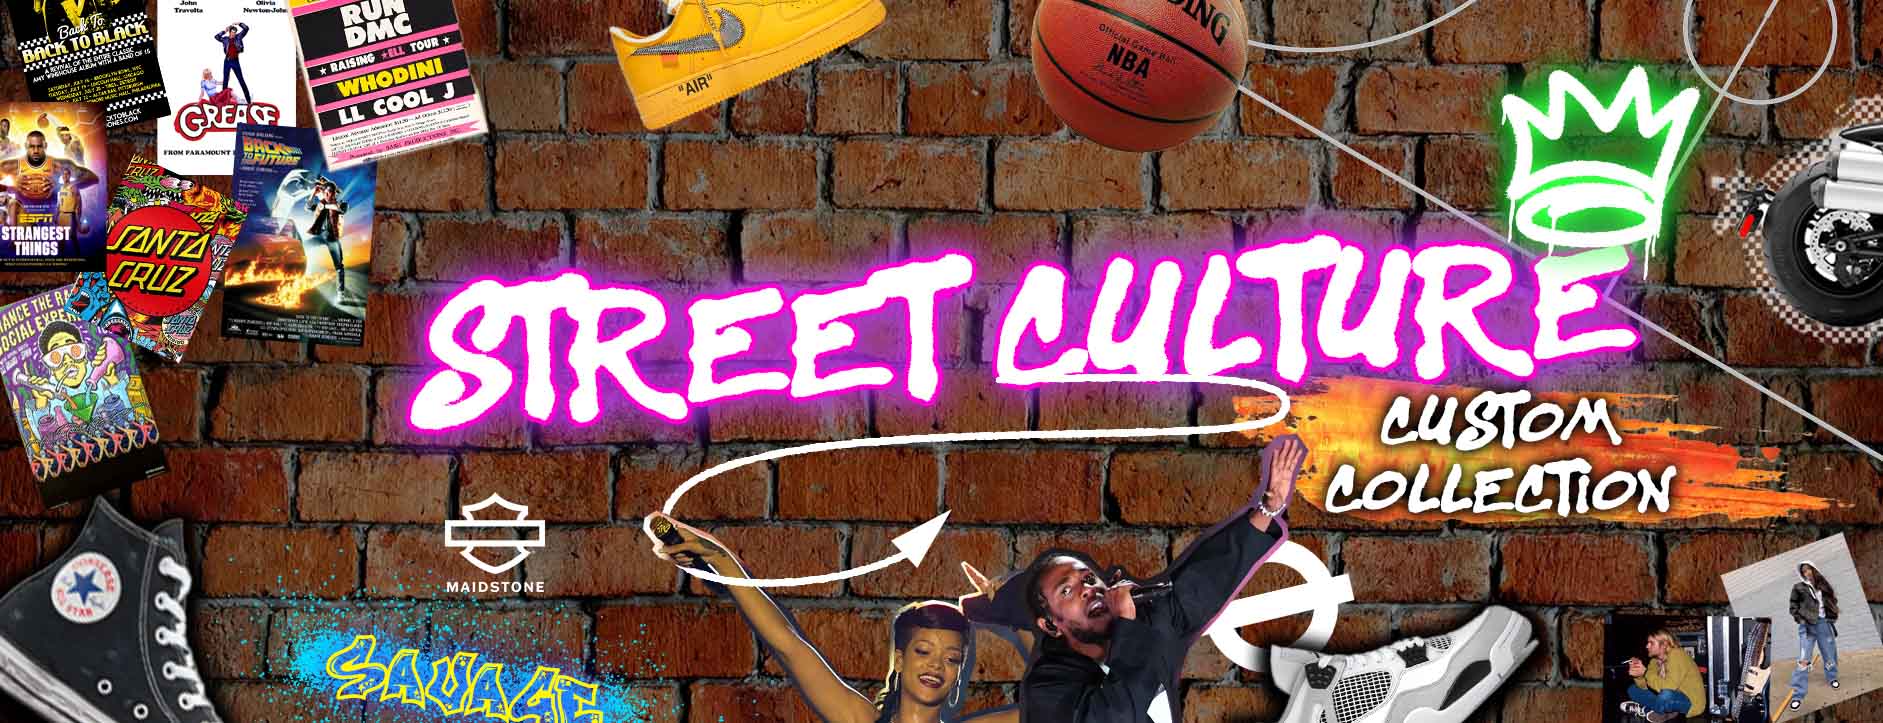 Street Culture project banner